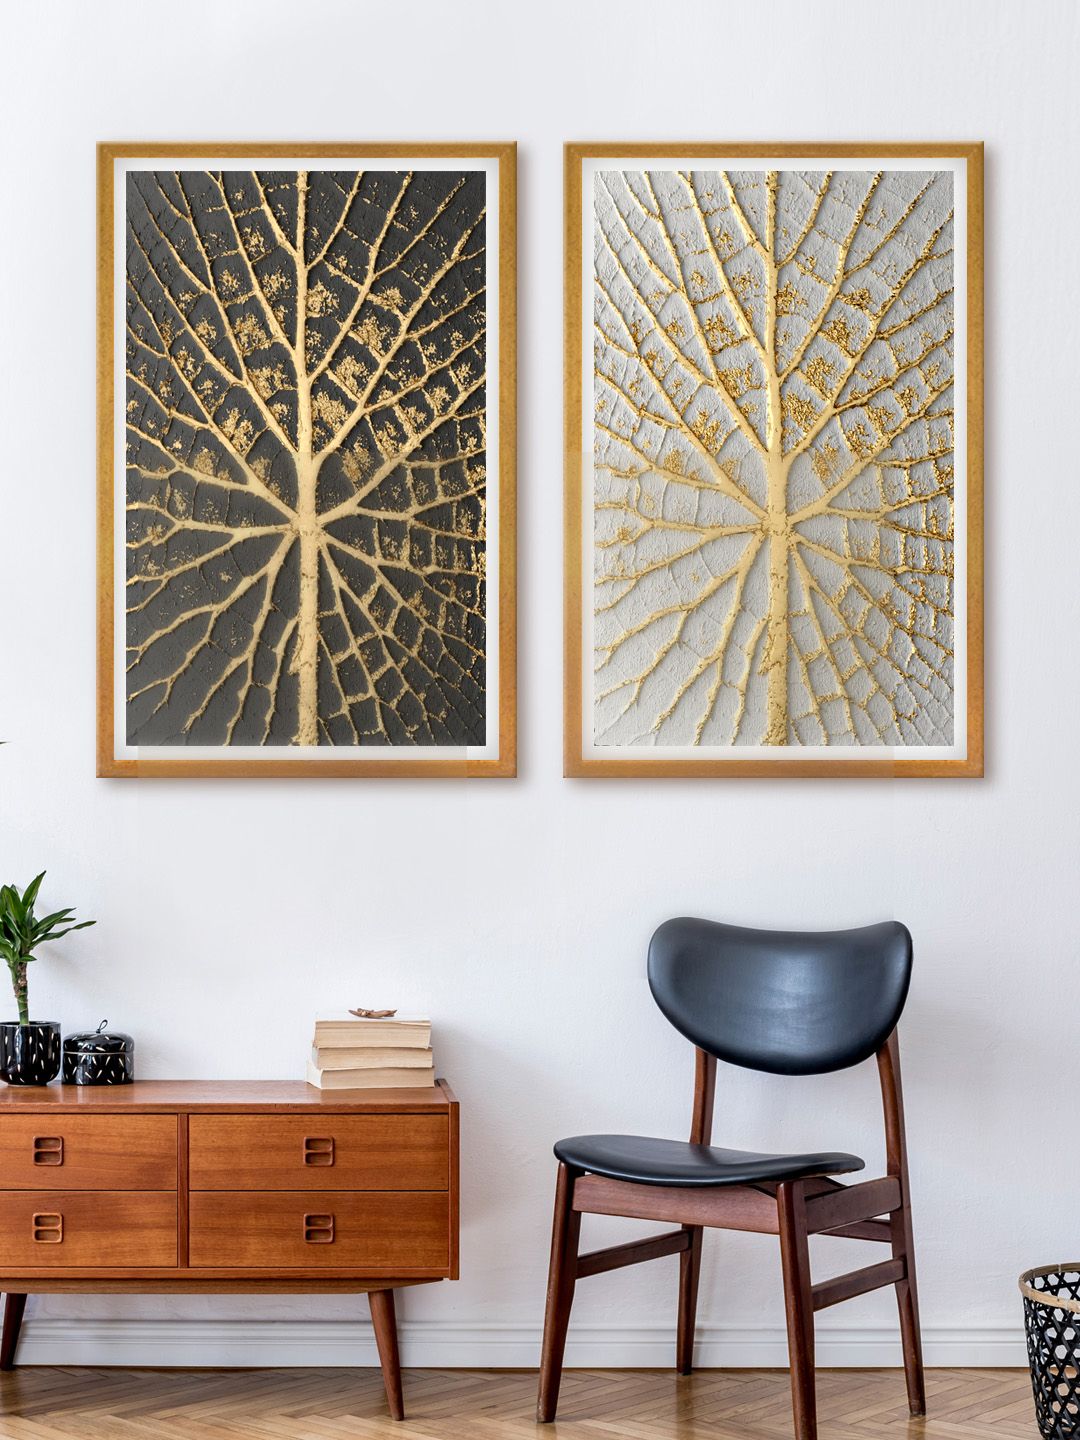 999Store Set Of 2 Gold-Toned & Grey Tree Printed Canvas Wall Art Price in India